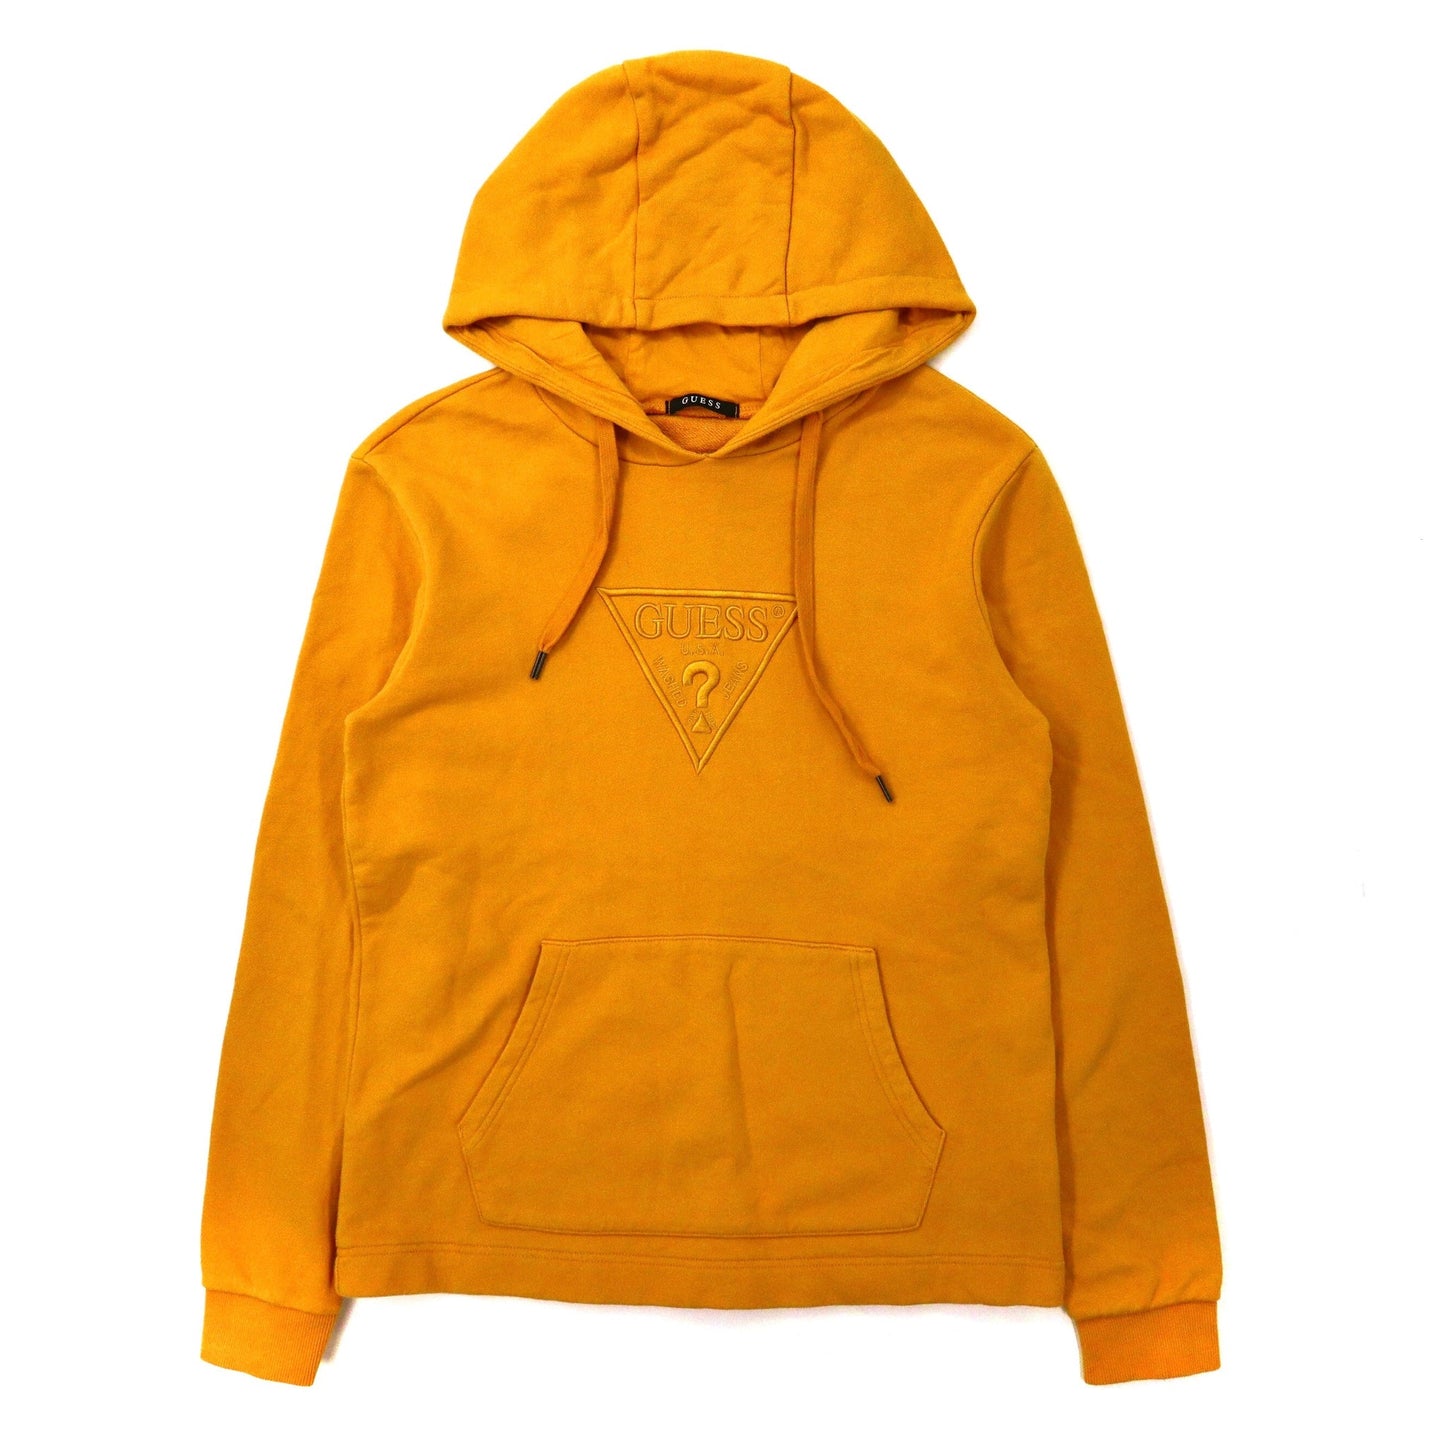 GUESS Logo HOODIE M Yellow Cotton Triangle Logo Embroidery